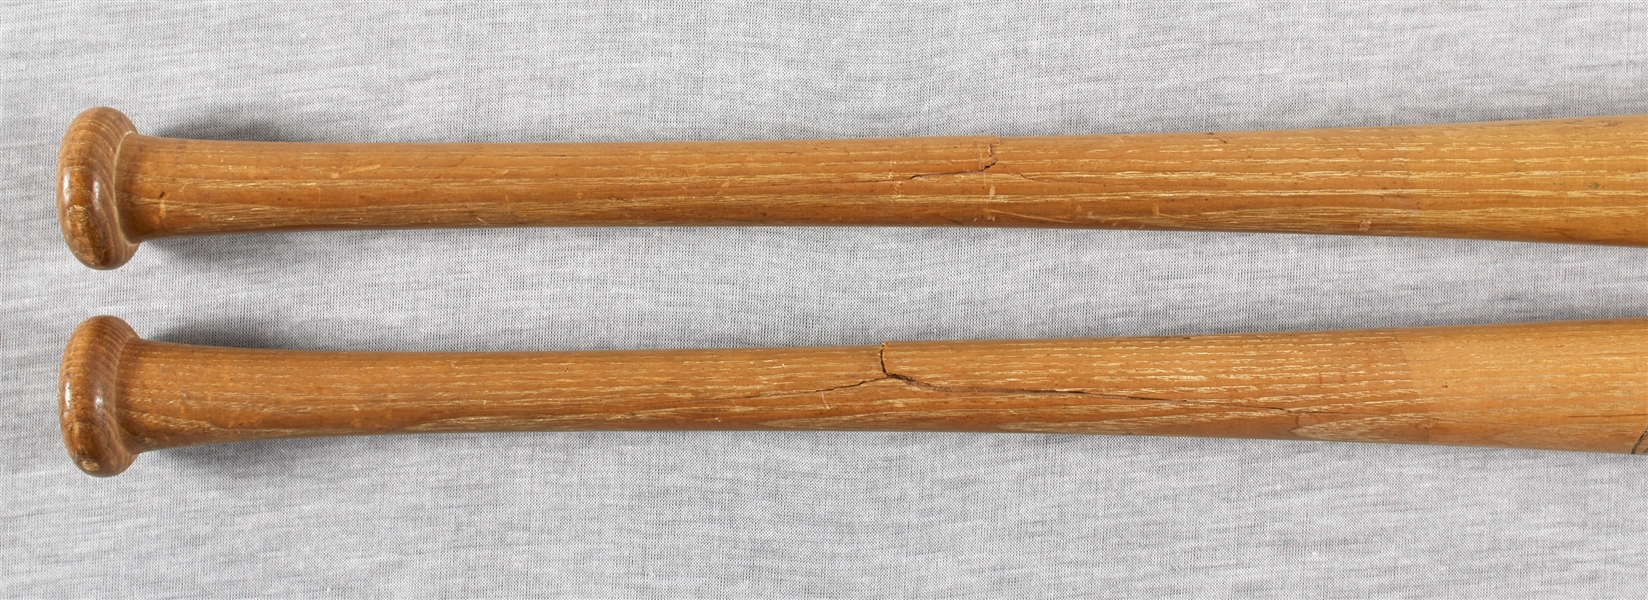 Hal Smith Game-Used H&B Bats Pair (2)